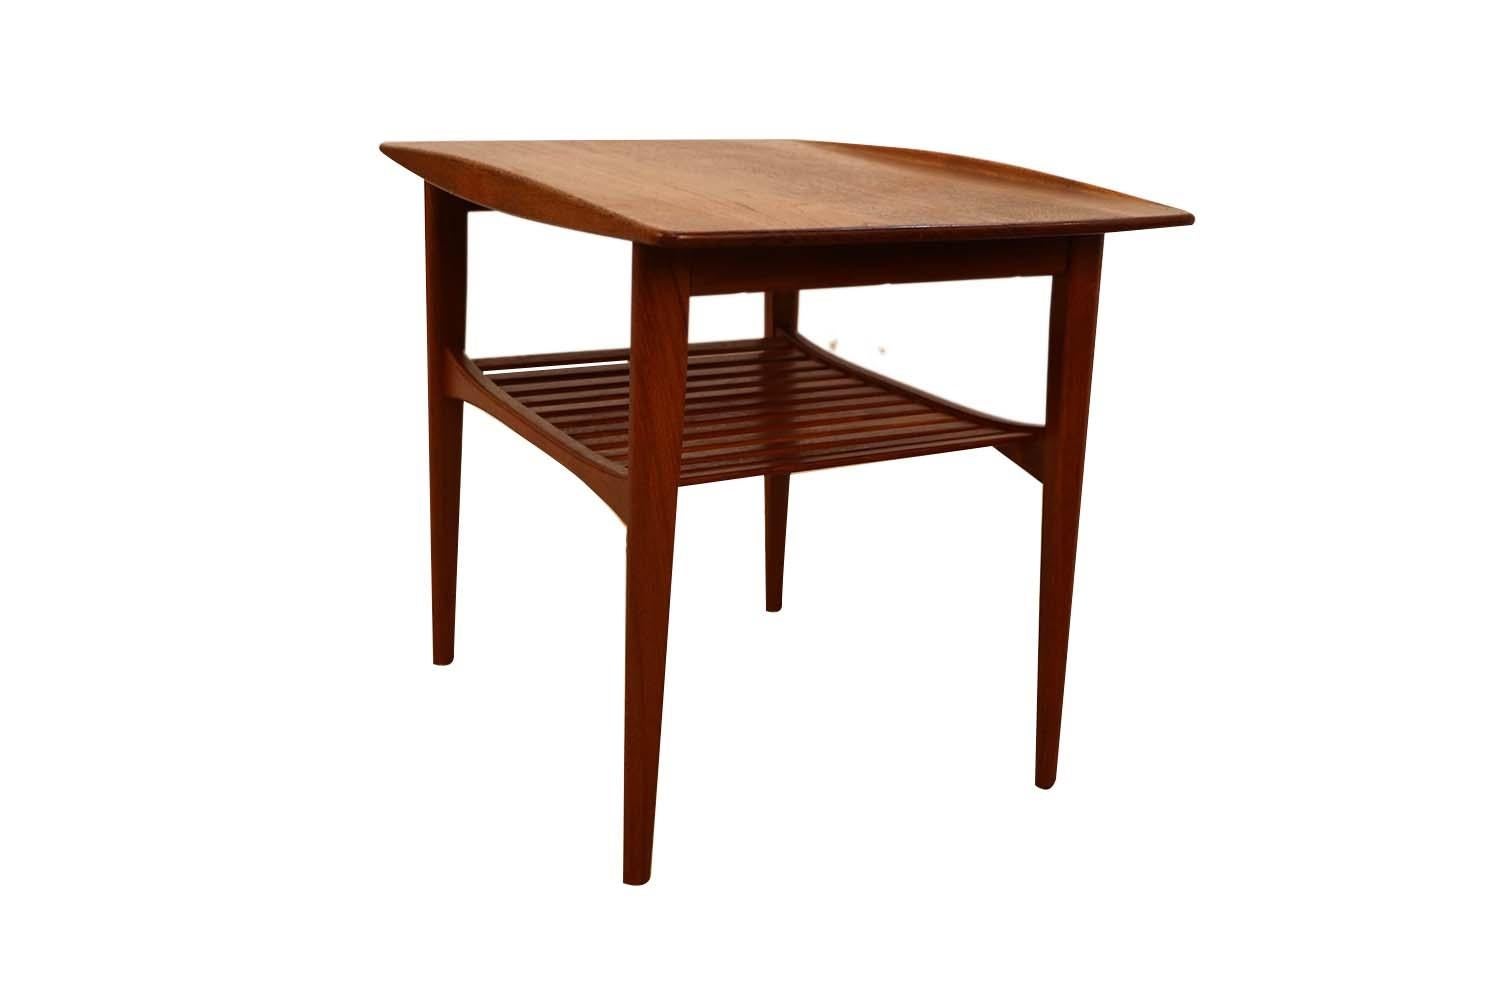 Solid Teak model FD510 Mid-Century Modern imported by John Stuart side table designed by Tove and Edvard Kindt-Larsen and manufactured by France & Daverkosen. A solid teak rectangular table top with a graceful bowed side rail and features an open